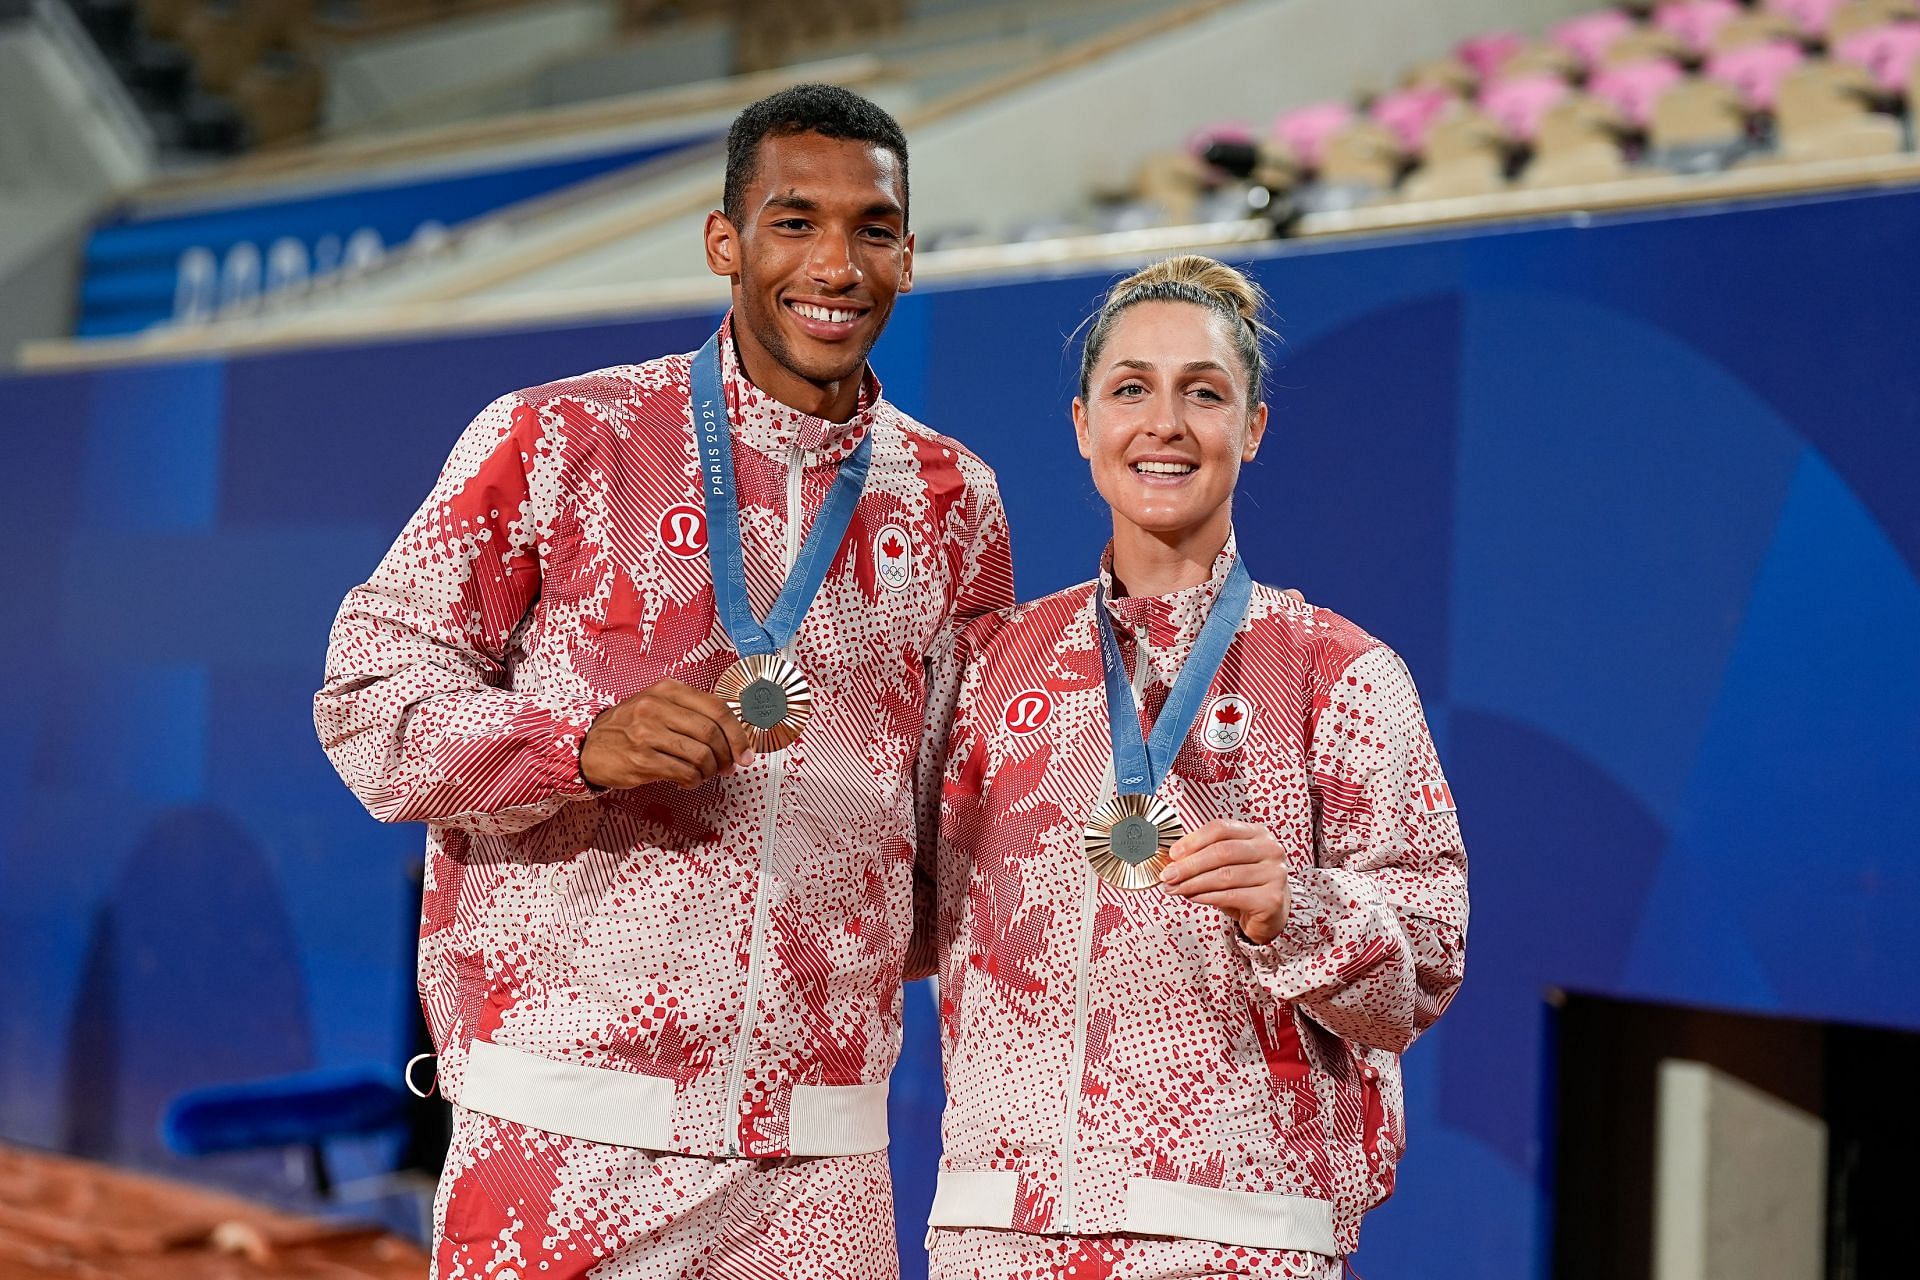 Felix Auger-Aliassime and Gabriela Dabrowski win historic mixed doubles bronze medal for Canada at Paris Olympics 2024